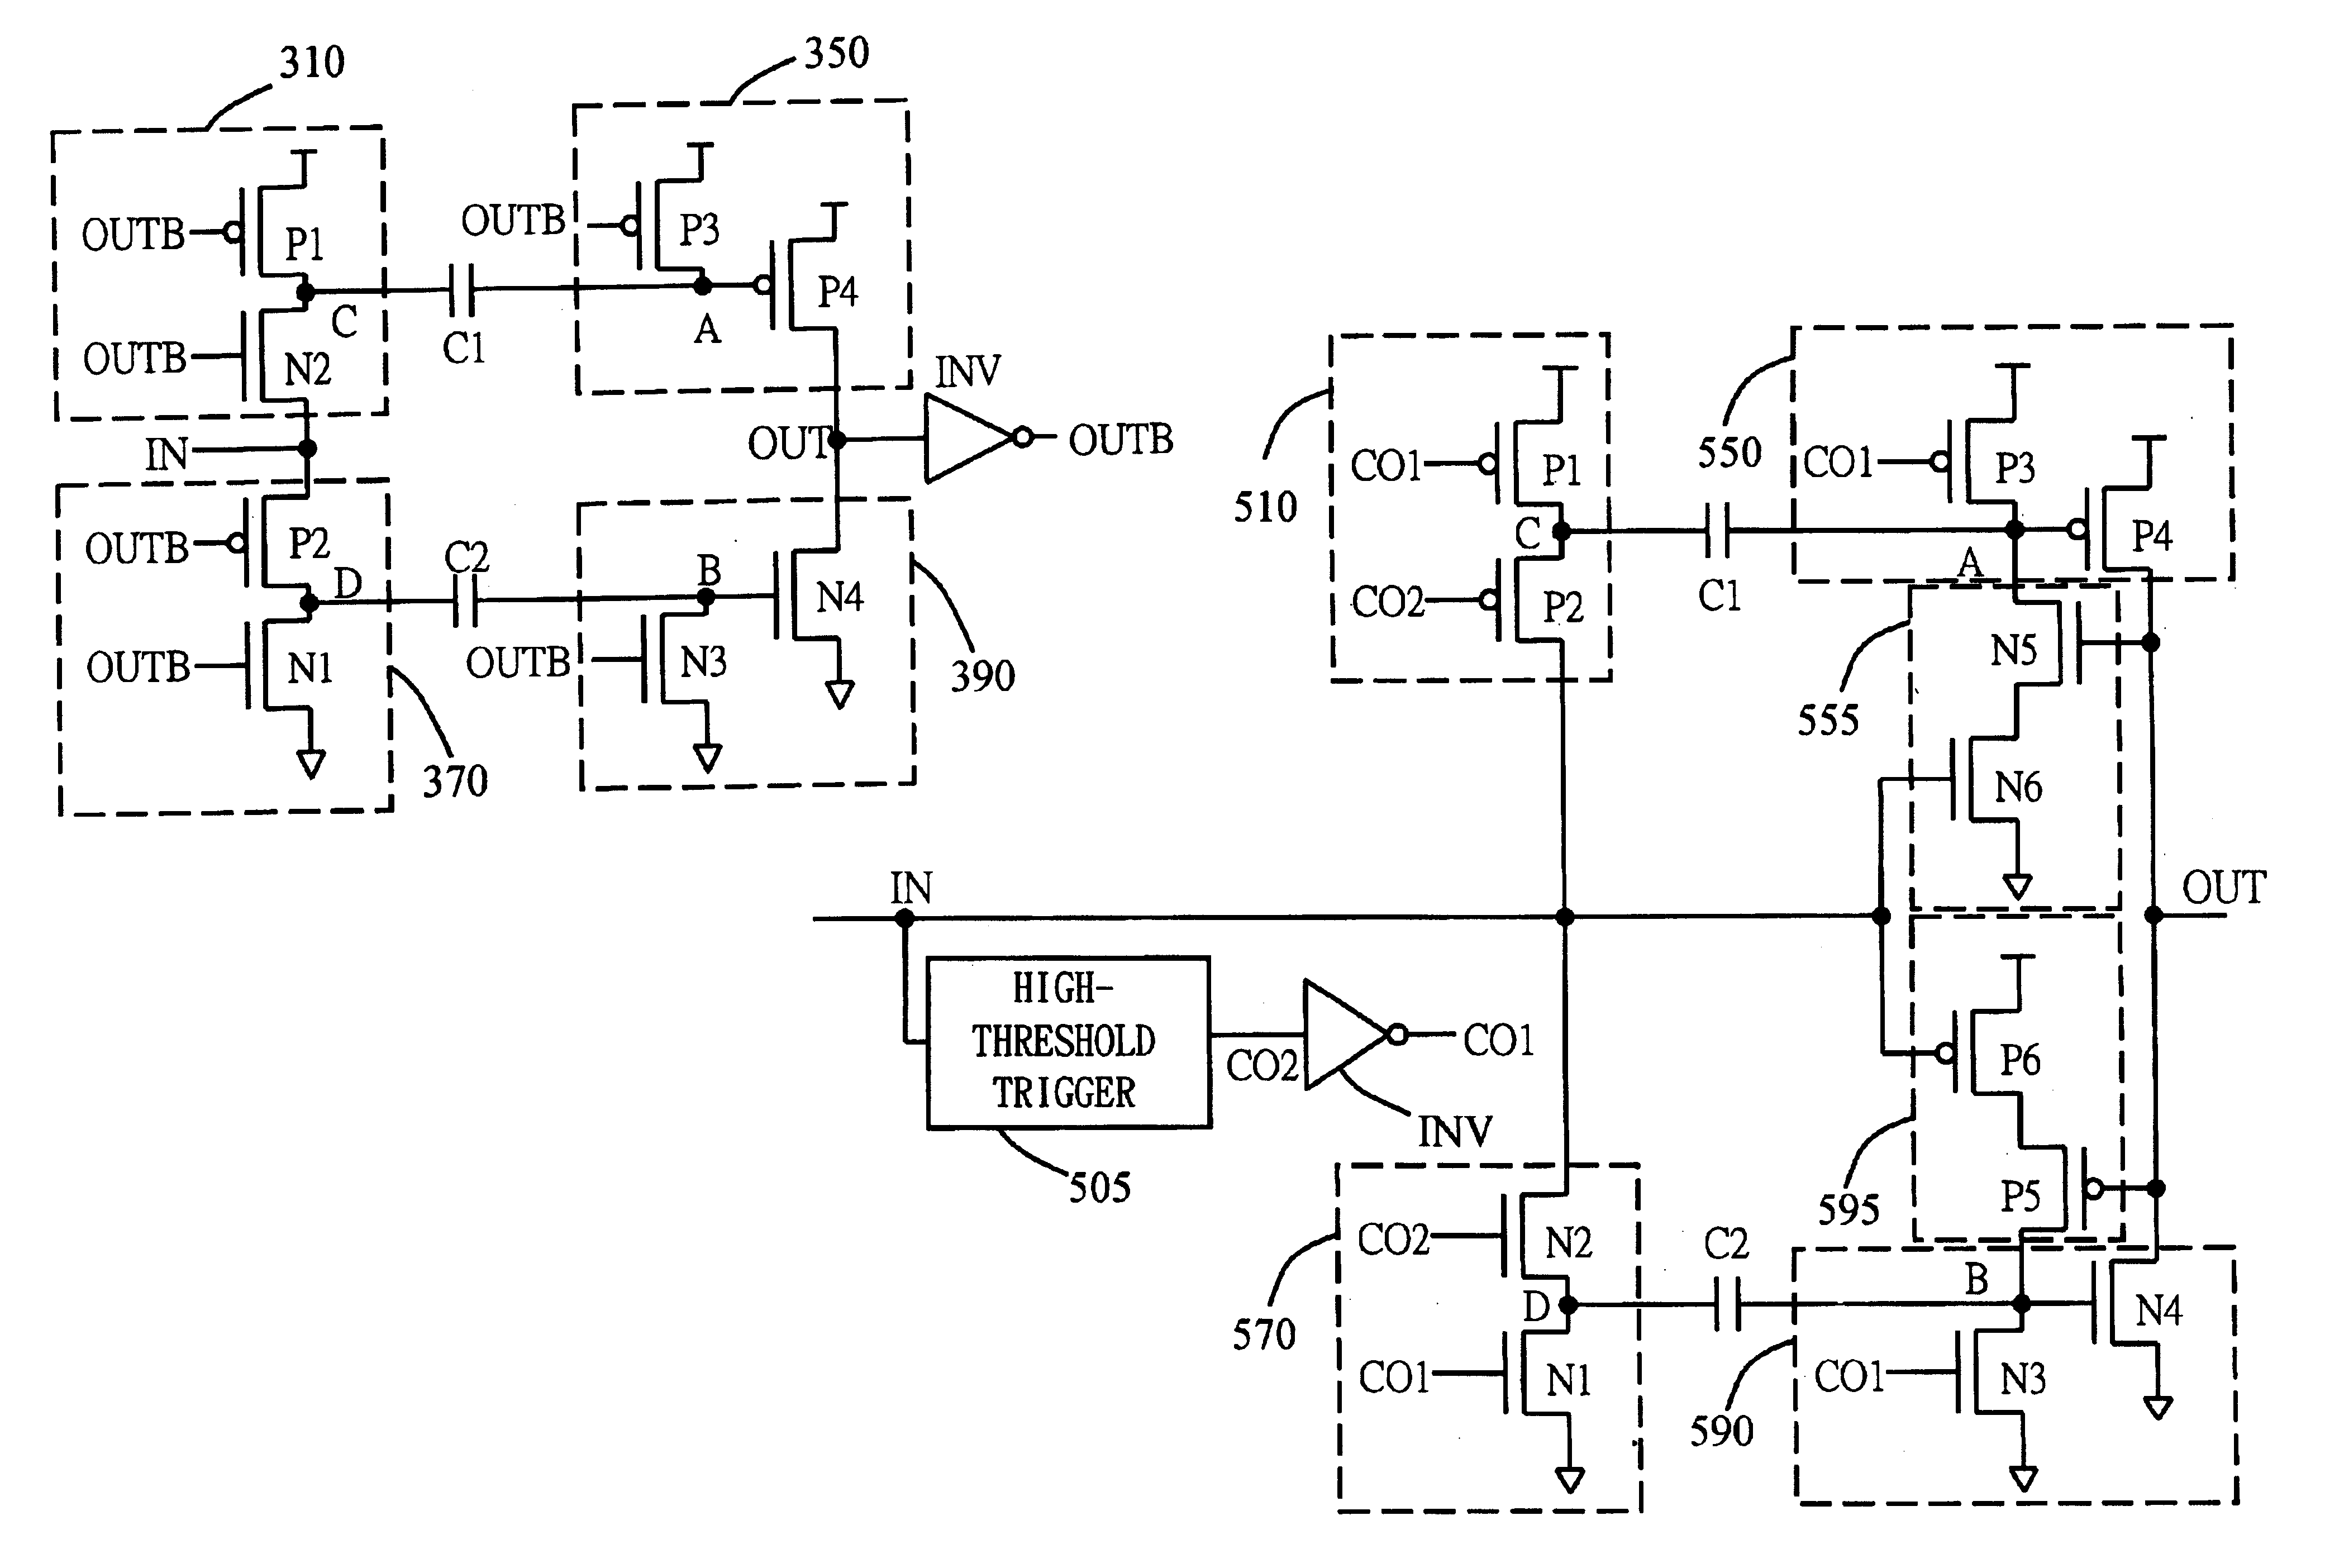 Apparatus for capacitor-coupling acceleration